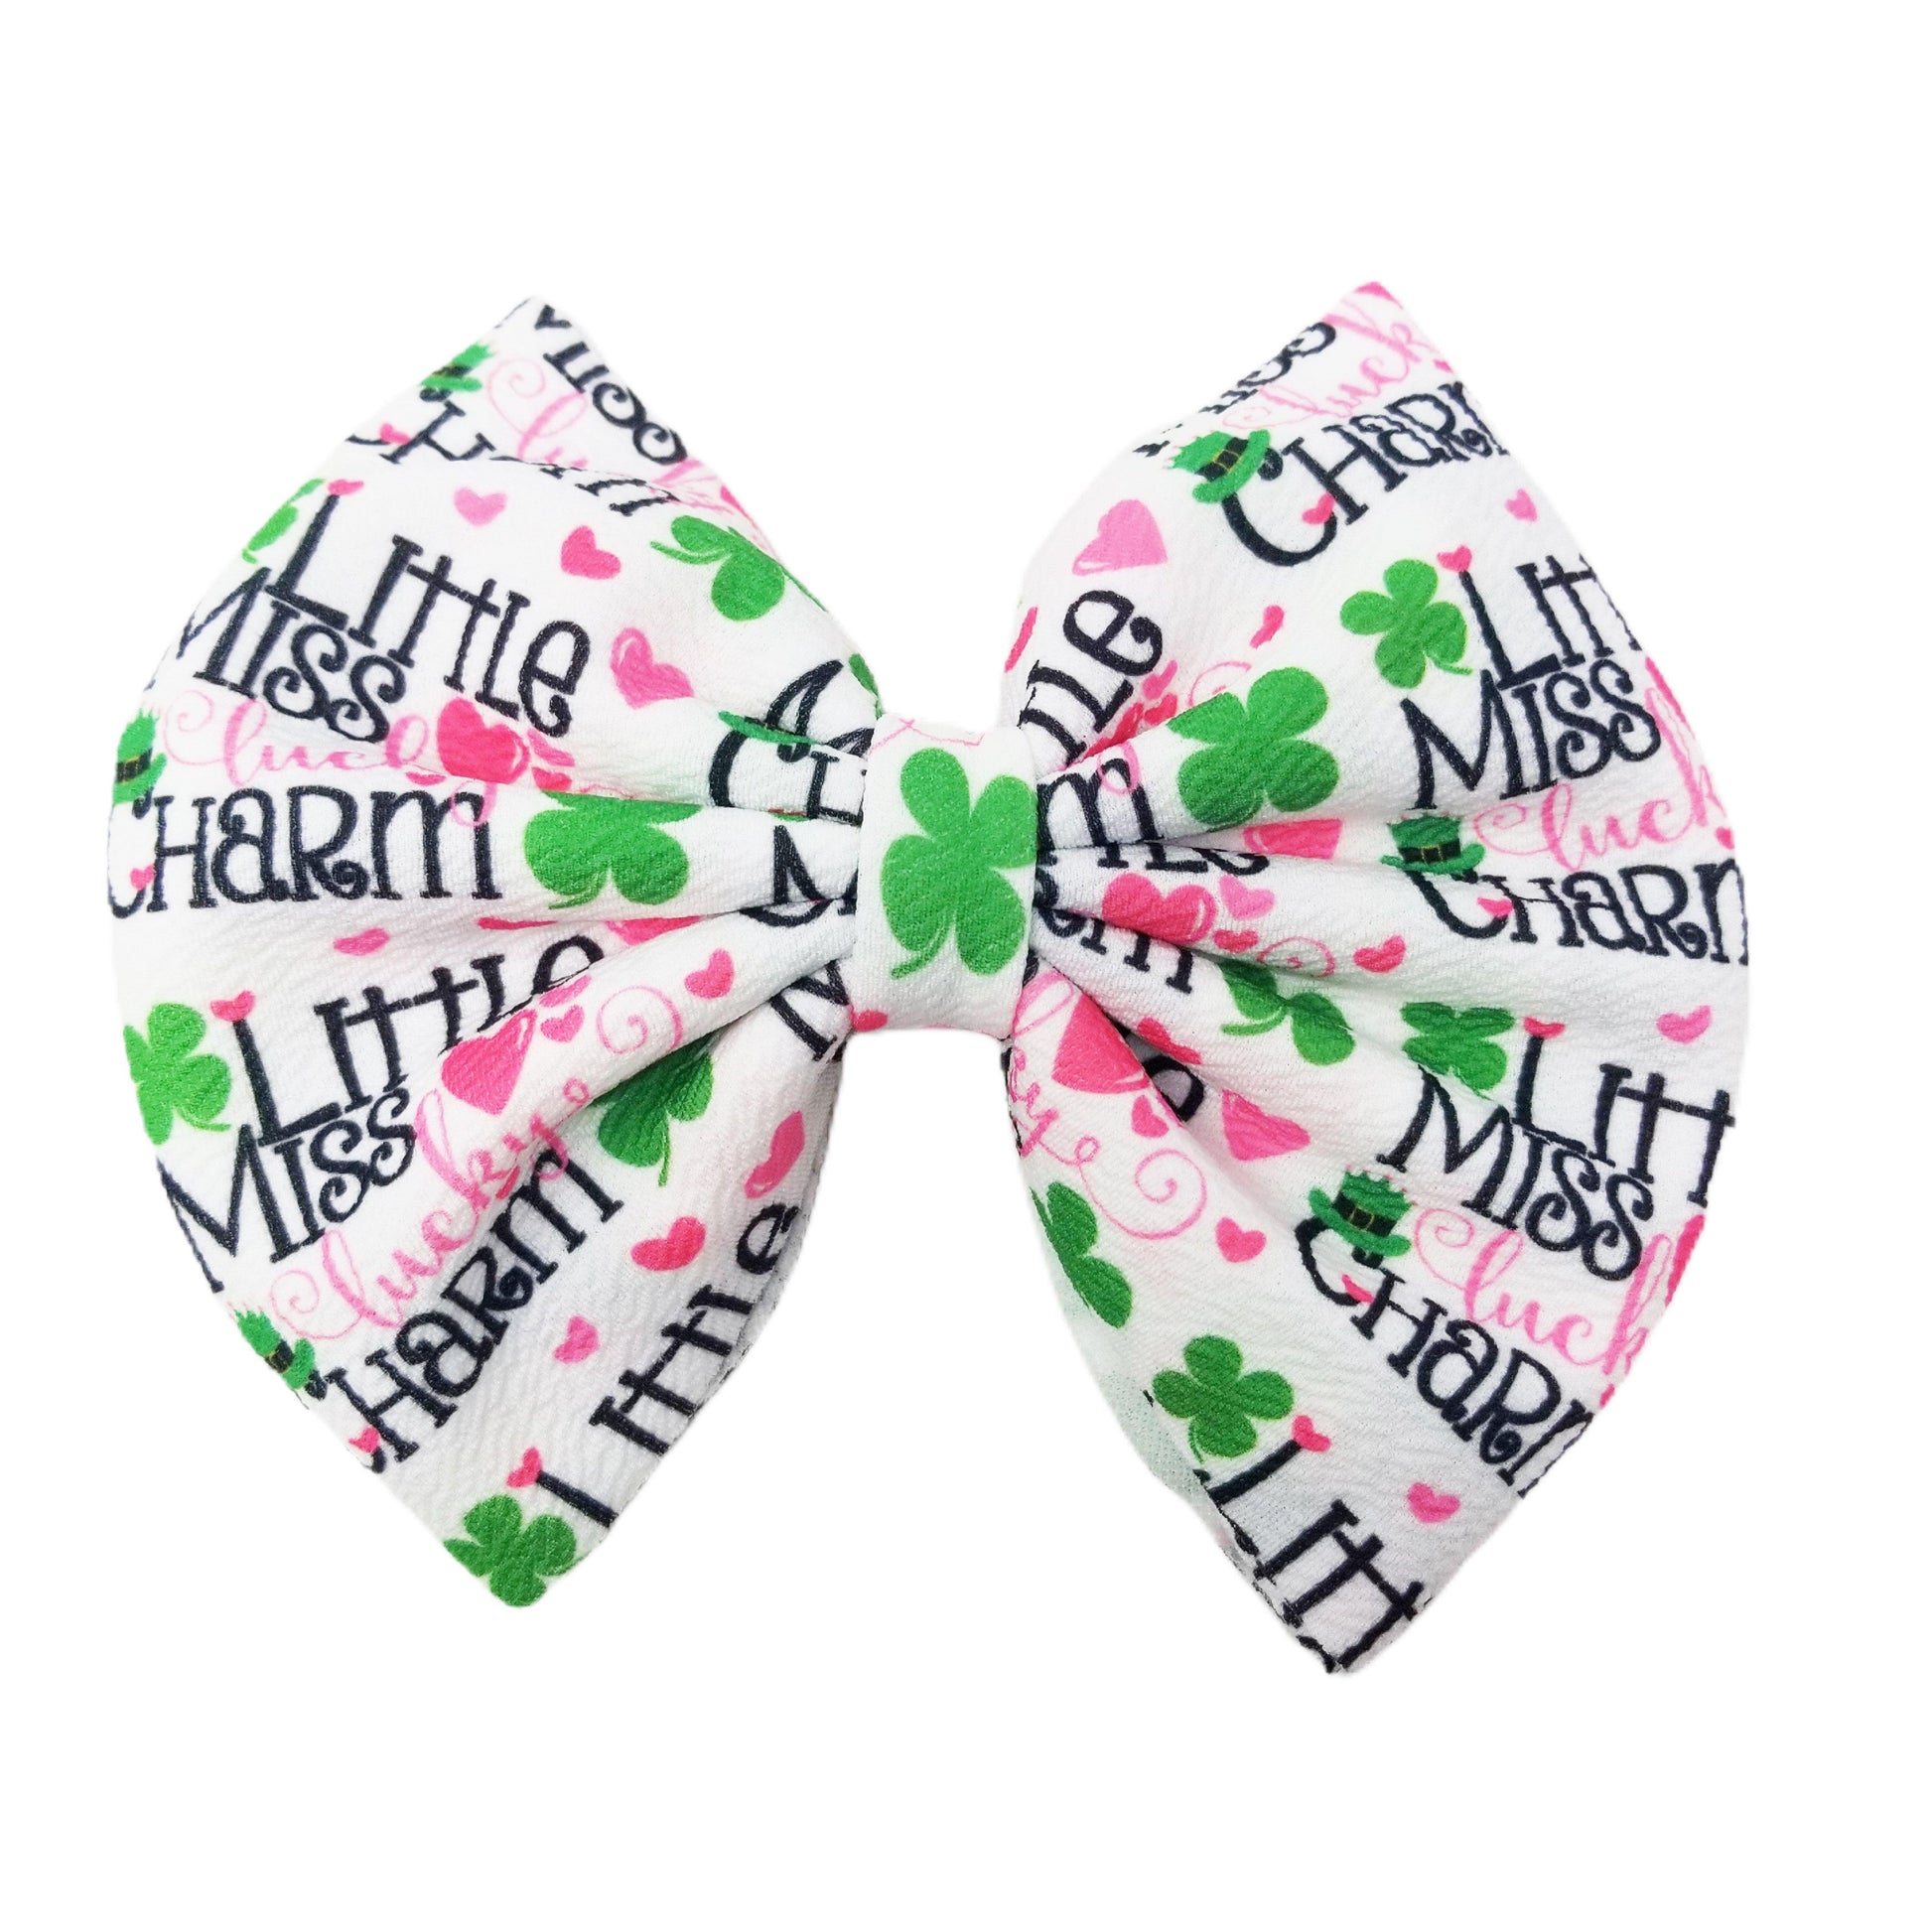 Little Miss Lucky Charm Fabric Bow - Waterfall Wishes